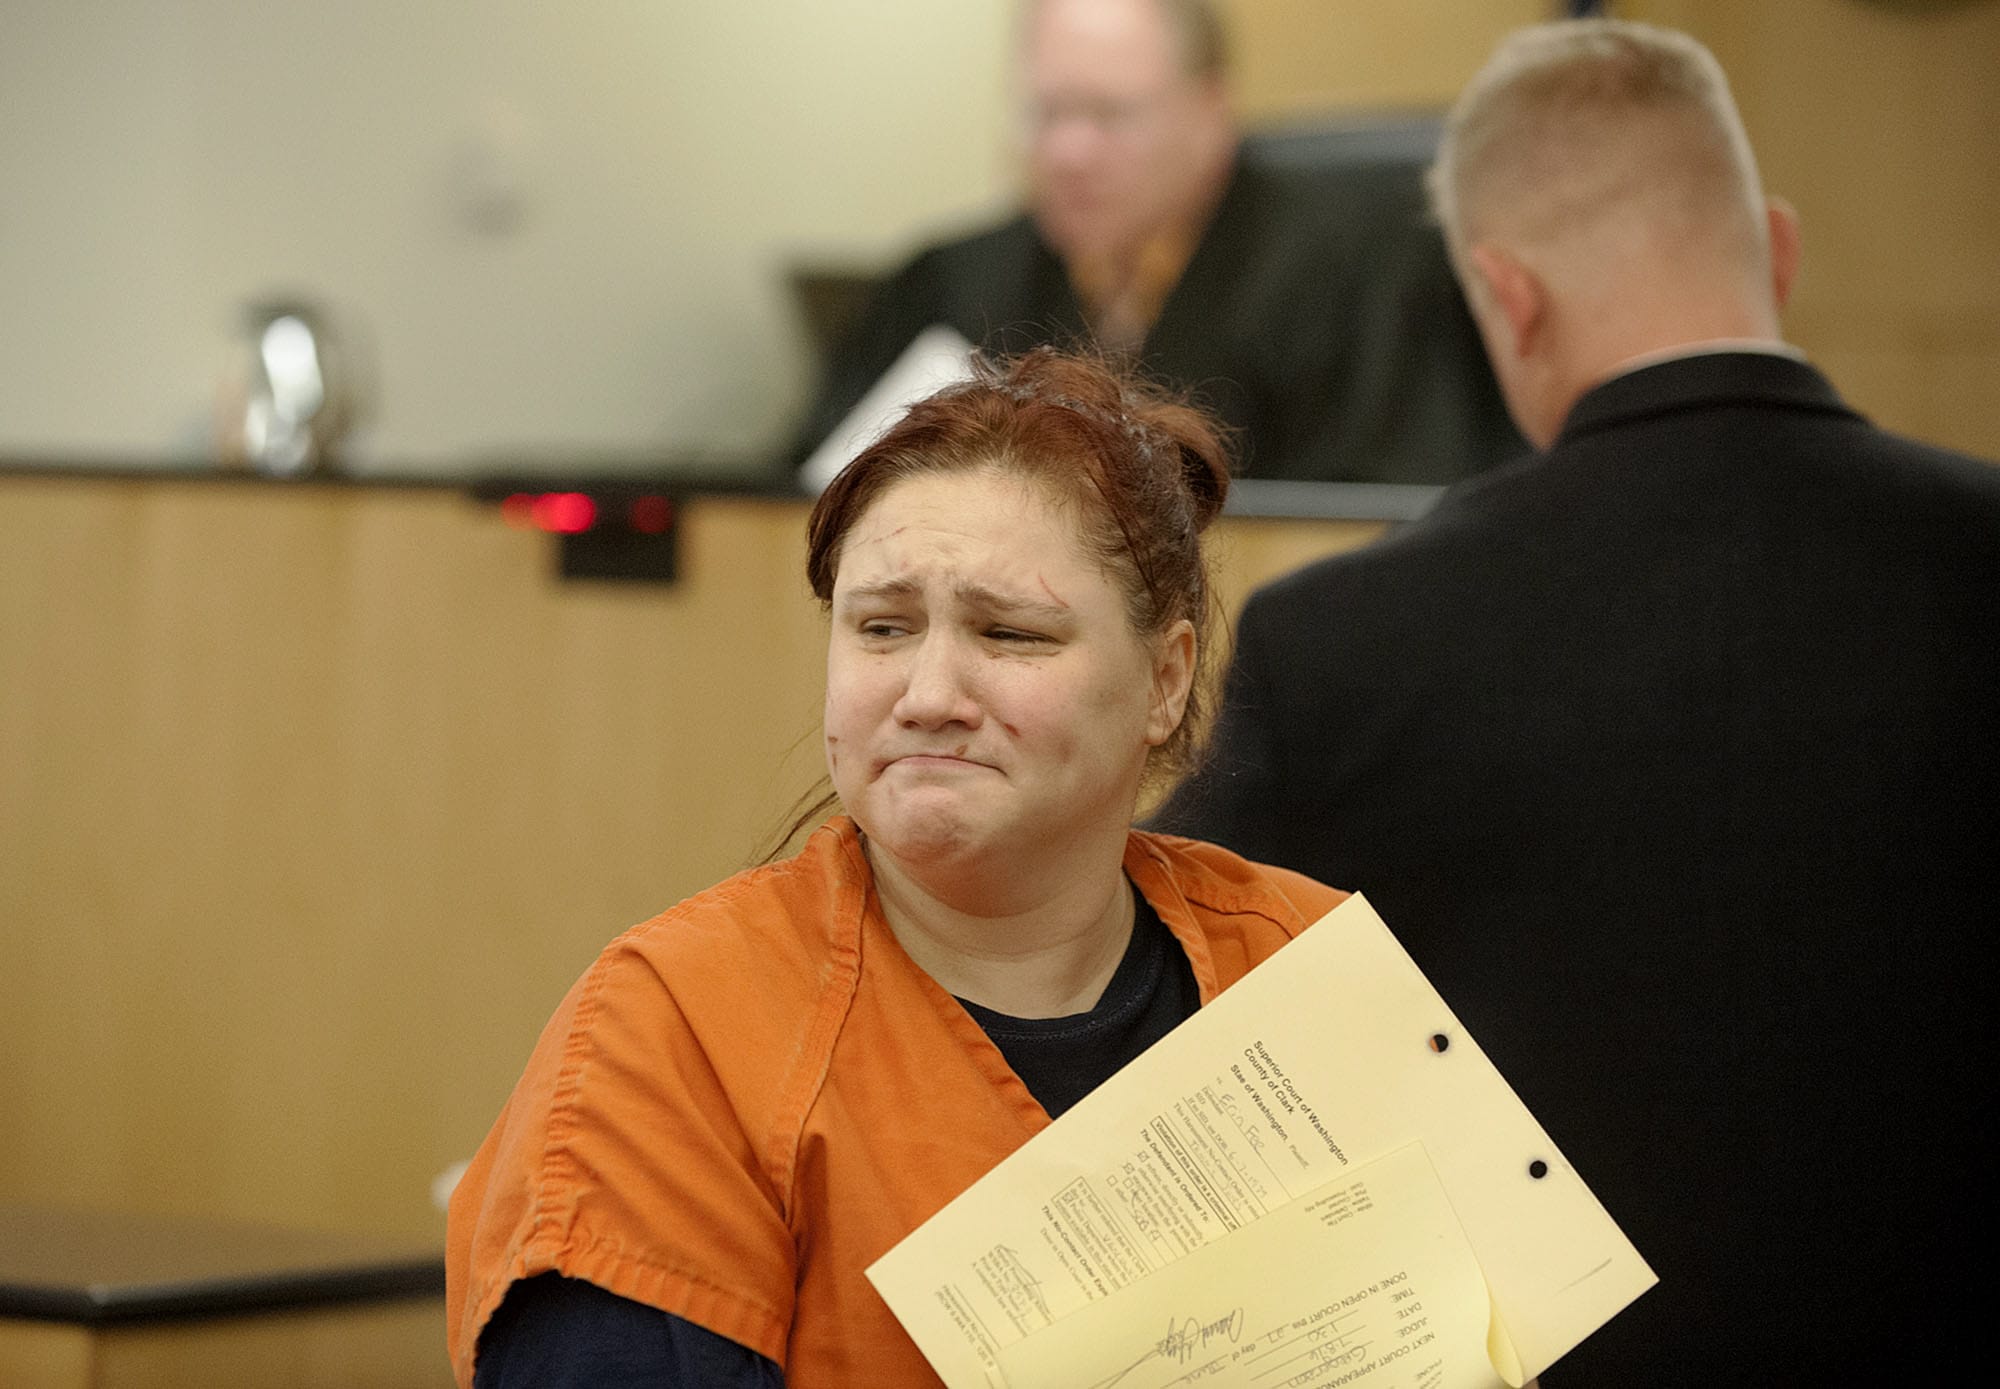 Erin Lauris Fee, 37, of Vancouver makes a first appearance on pending first-degree assault charges Monday morning in Clark County Superior Court.